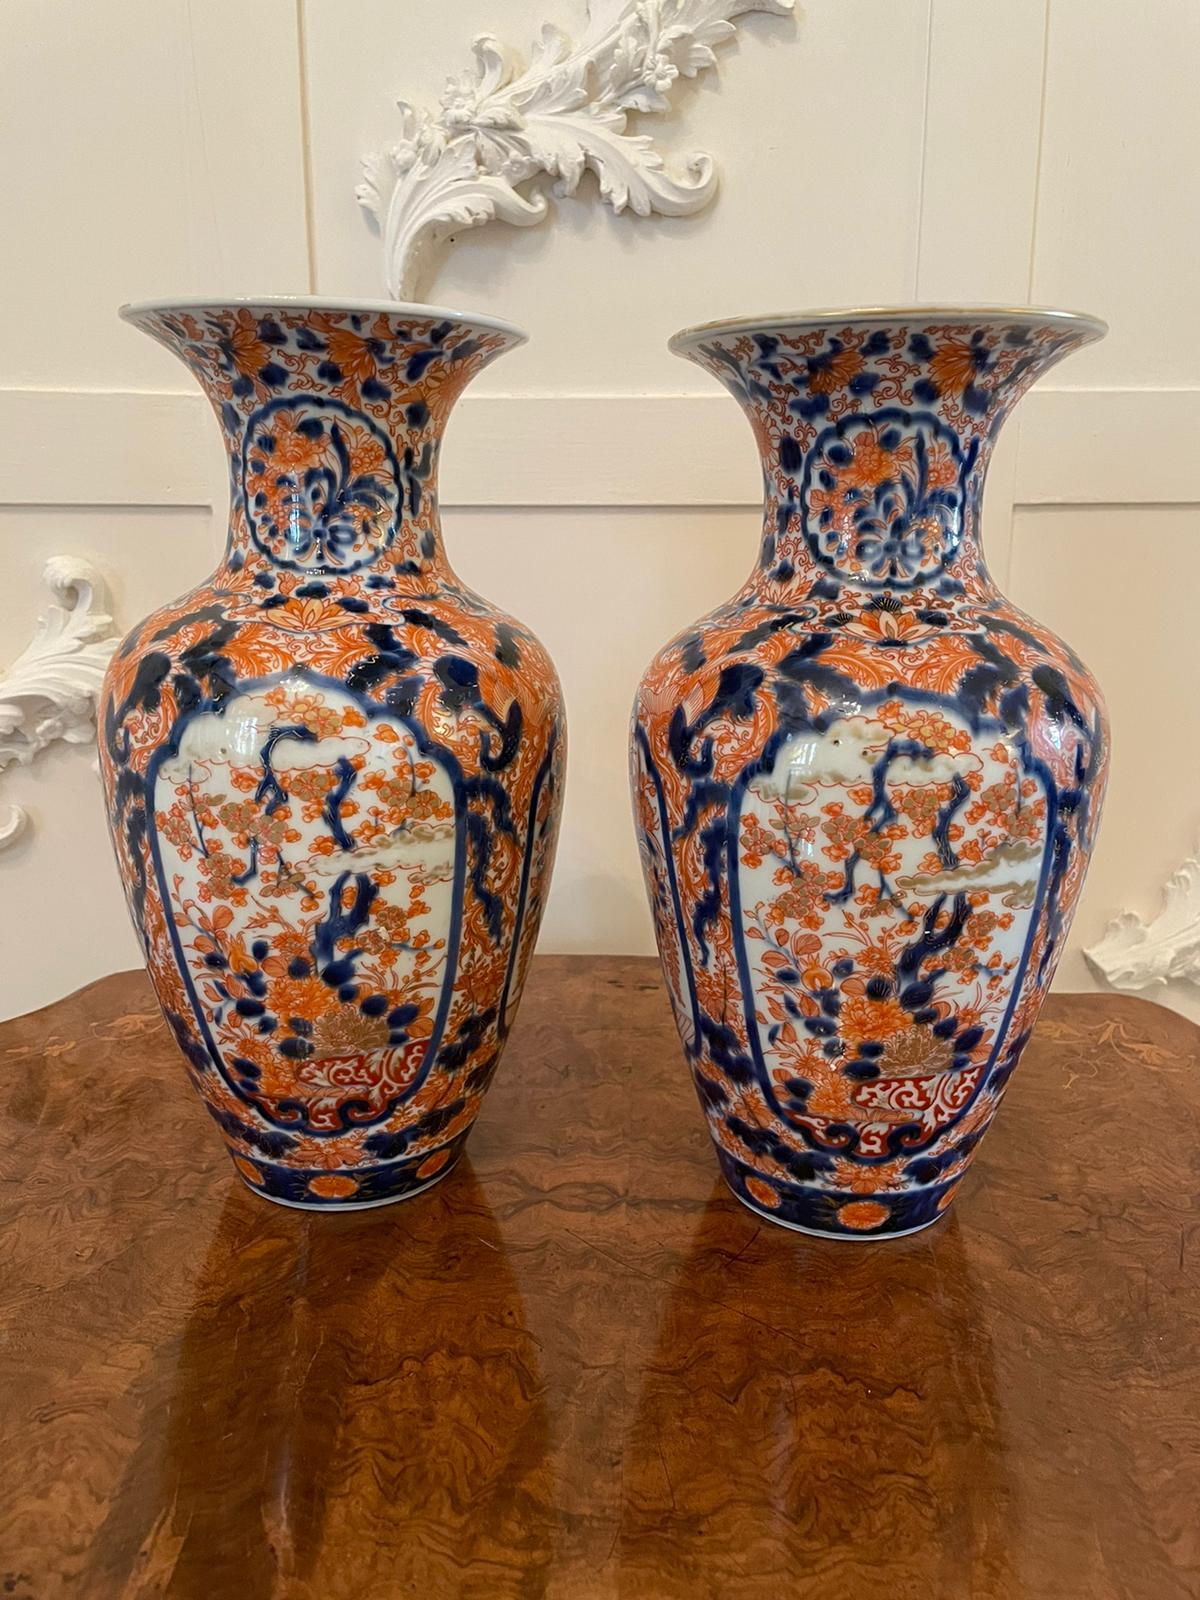 Pair of quality Japanese Imari vases having a splendid shape with eye-catching quality hand painted decoration in red, blue, gold and white.

Beautifully decorative (one small chip as photographed).

Measures: H 30cm
W 17cm
D 17cm
1900.
    